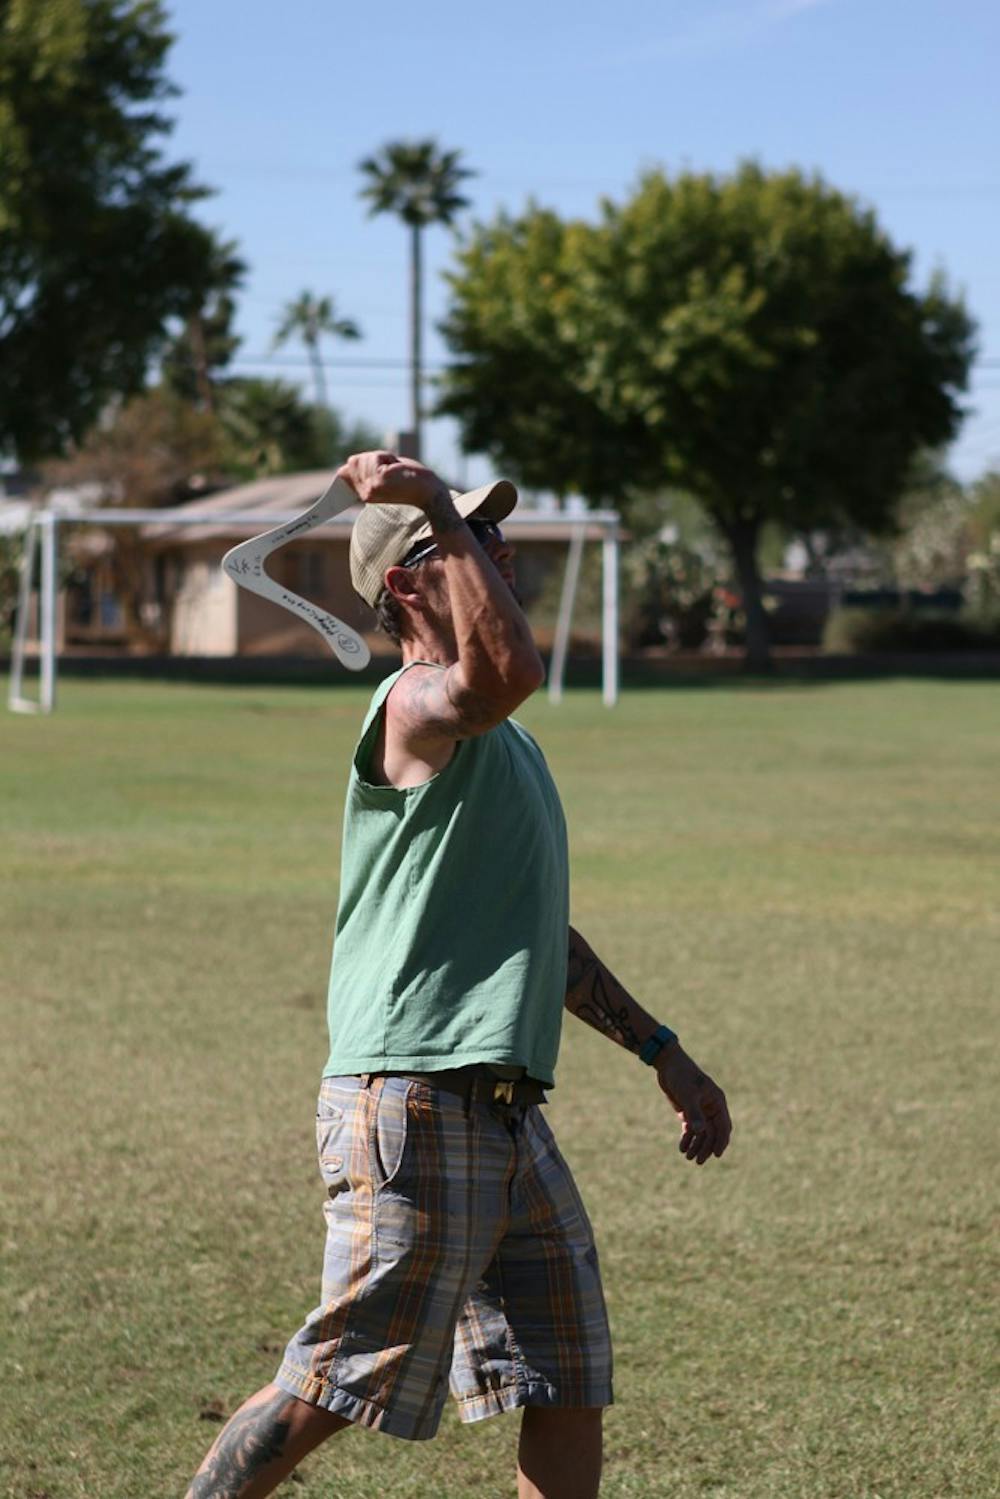 Lane demonstrates proper throwing technique. Photo by Peter Lazaravich.